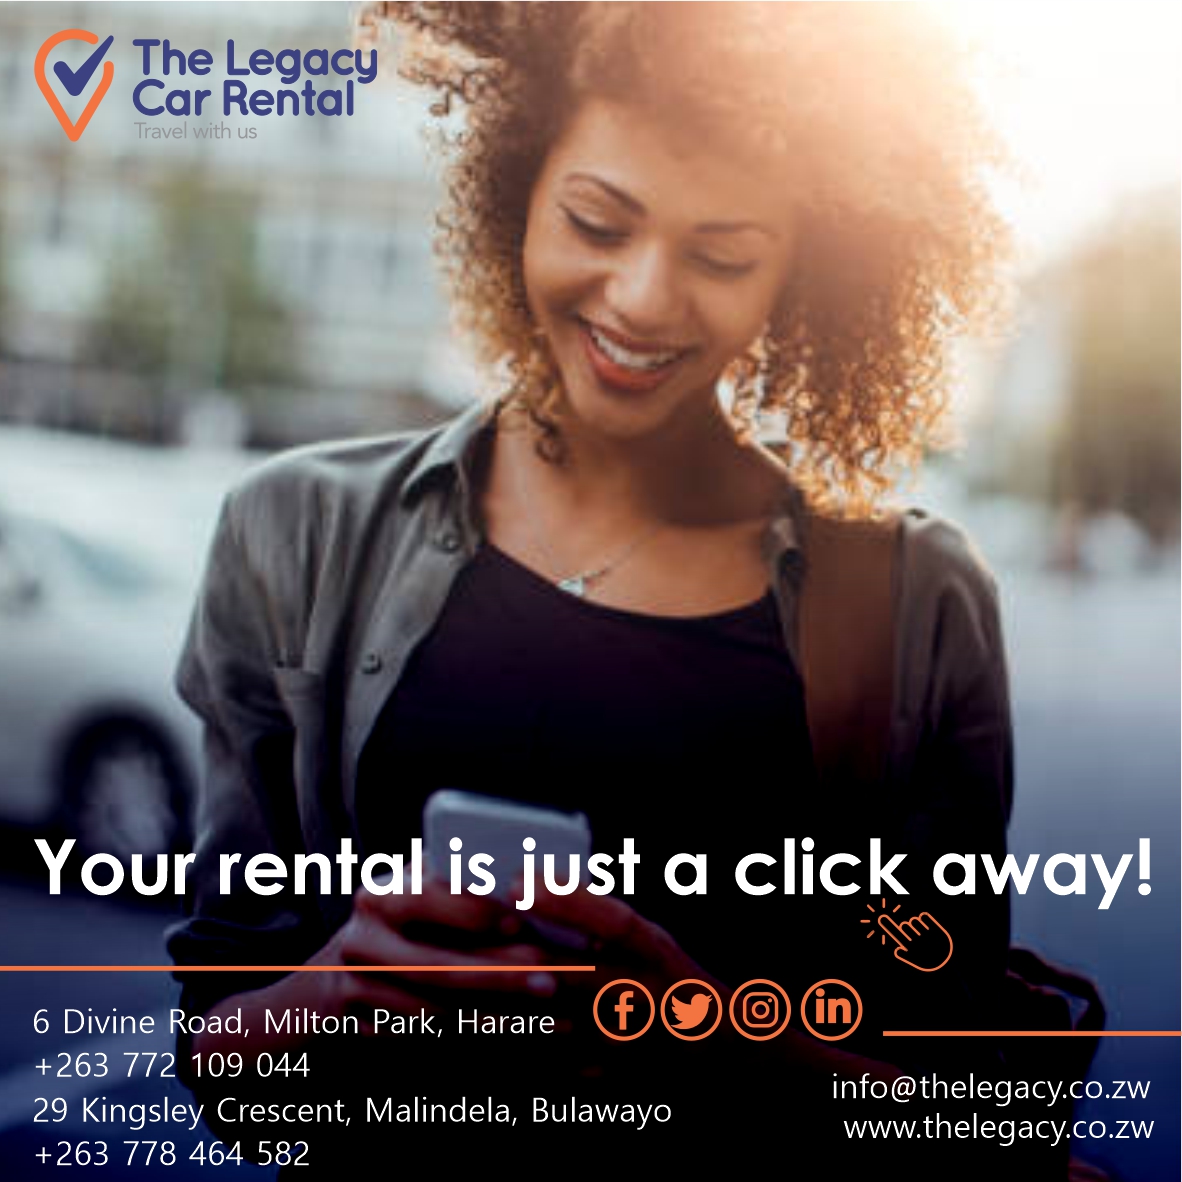 Your rental is just a click away!
#happymonday #stressfree #choiceisyours #Click #carrental #HassleFree #ChauffeurDrive #rent #Monday #clicktobook #chauffeur #easyhire #carhire #vehicle #yeswecan #hire #car #travel #booknow #startyourjourney #travelwithus #choose #us #rental